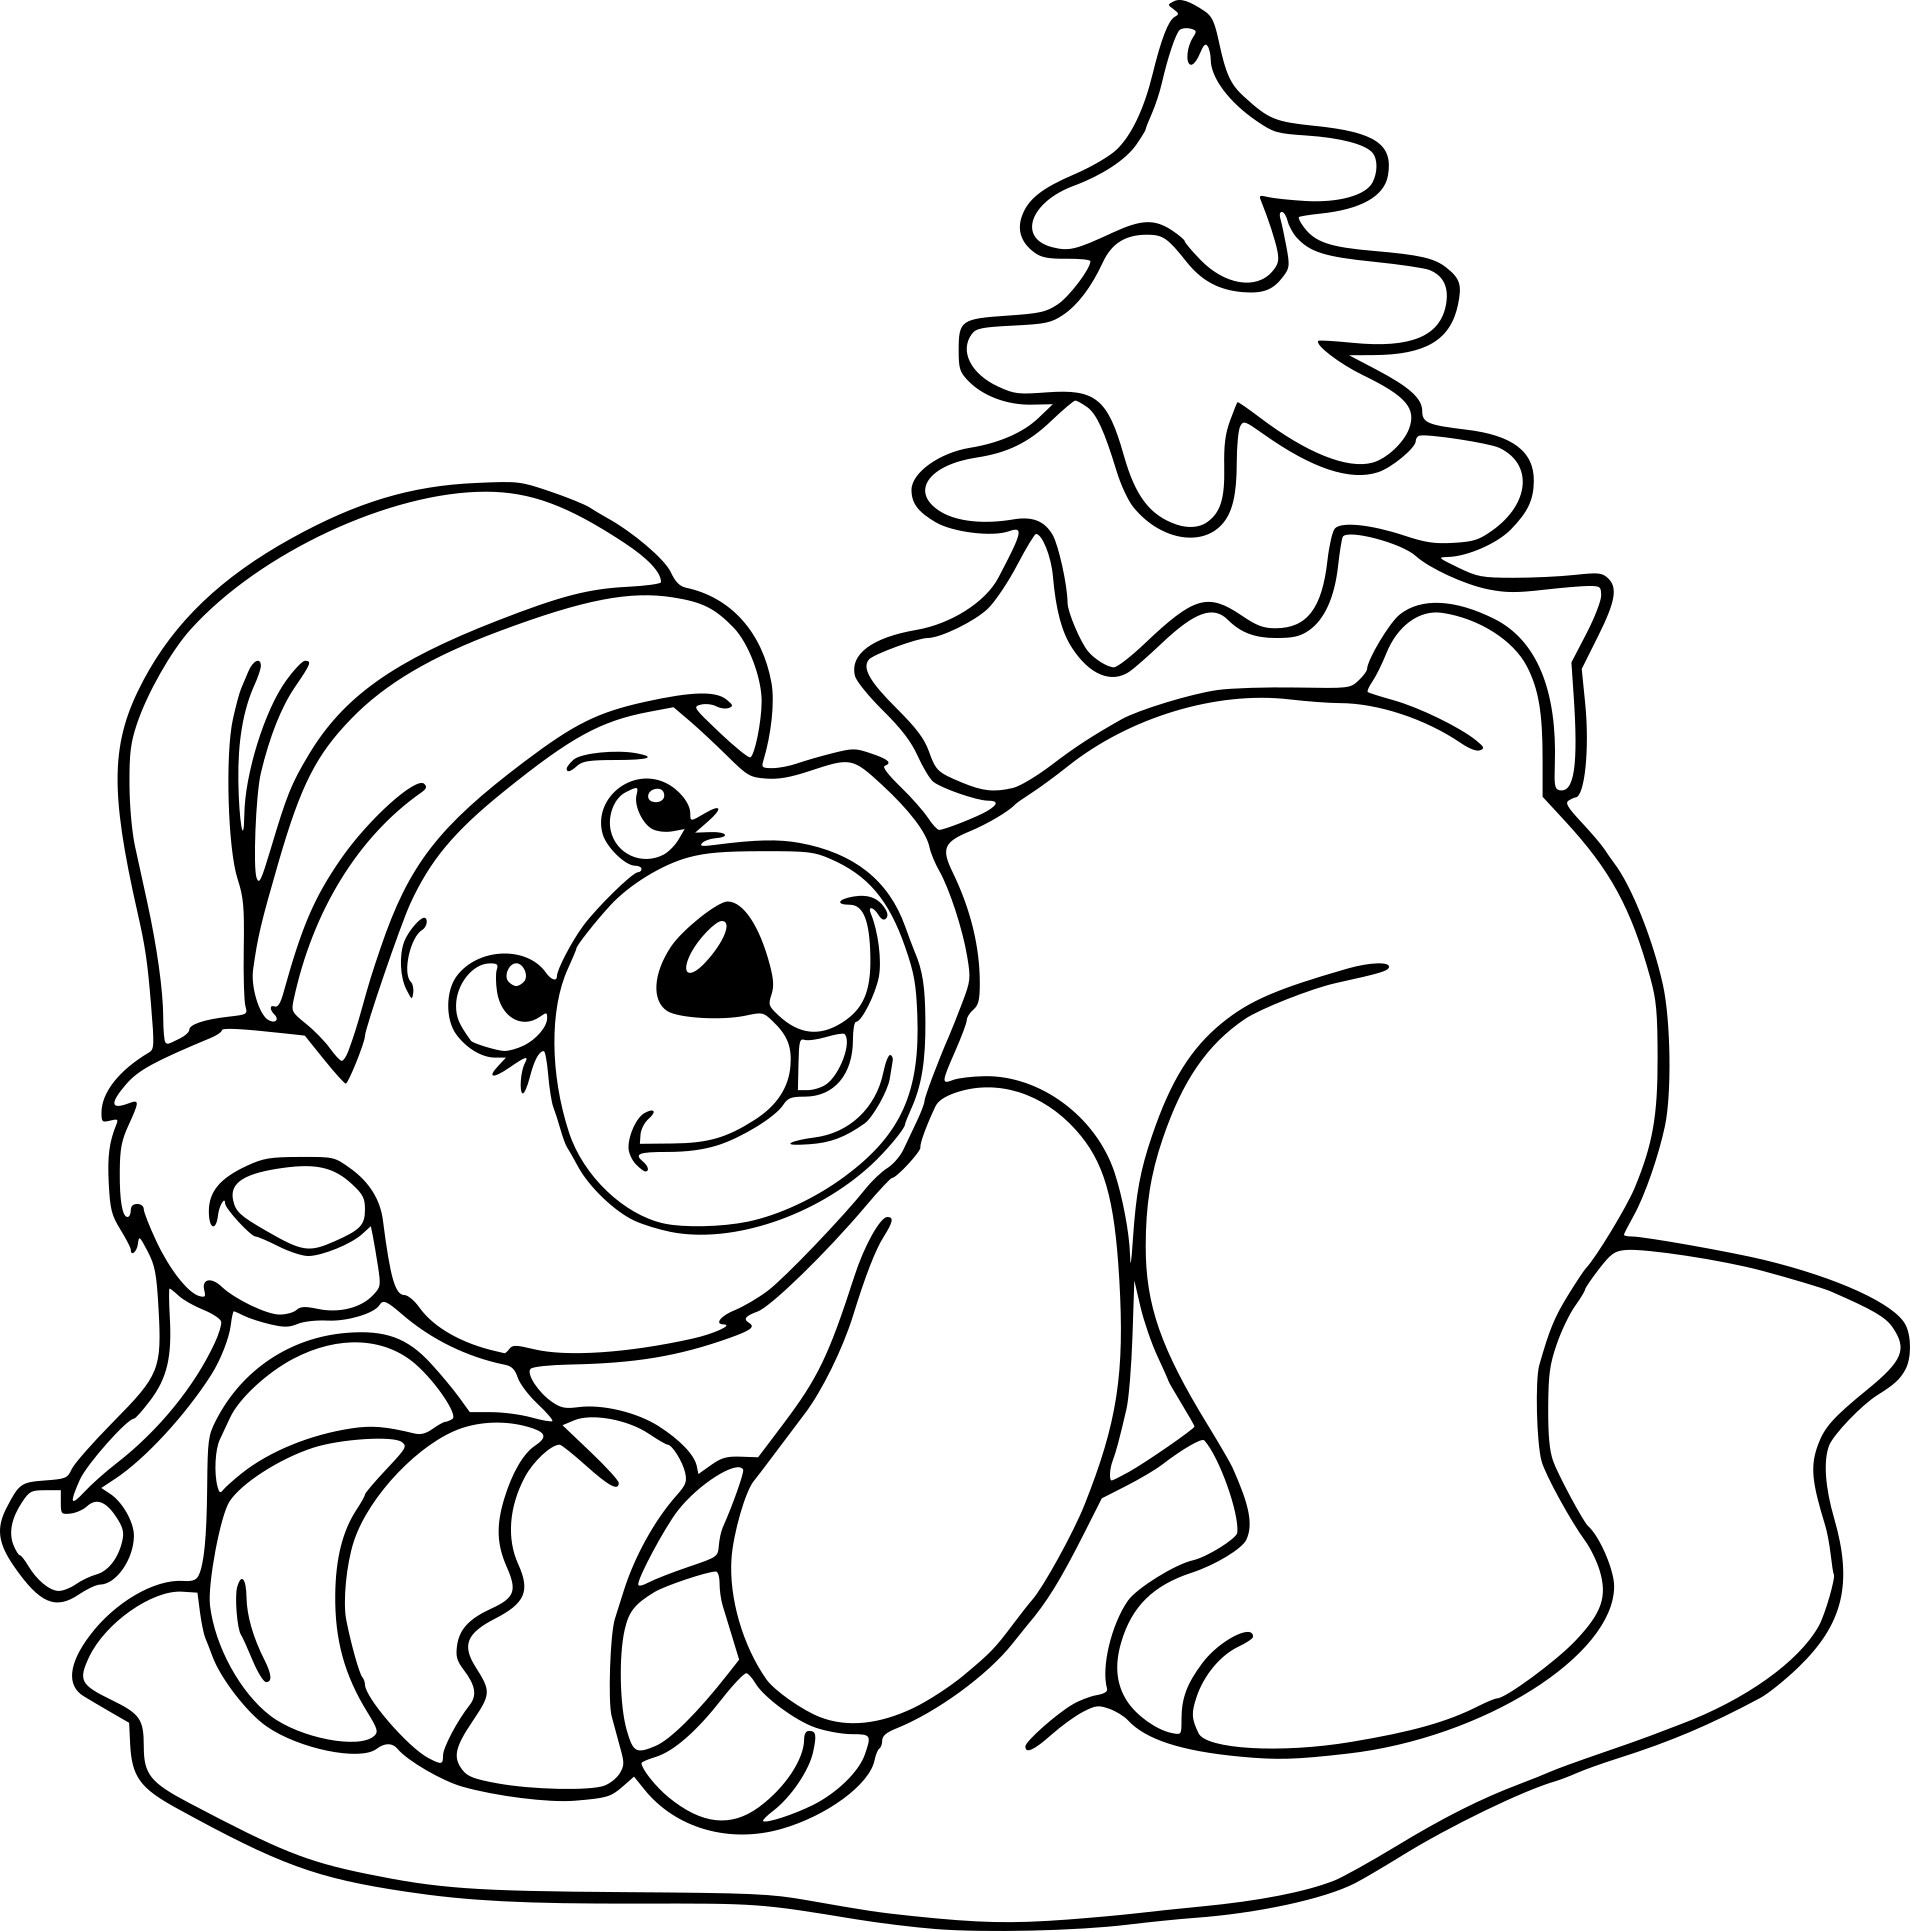 Bears For Christmas coloring page